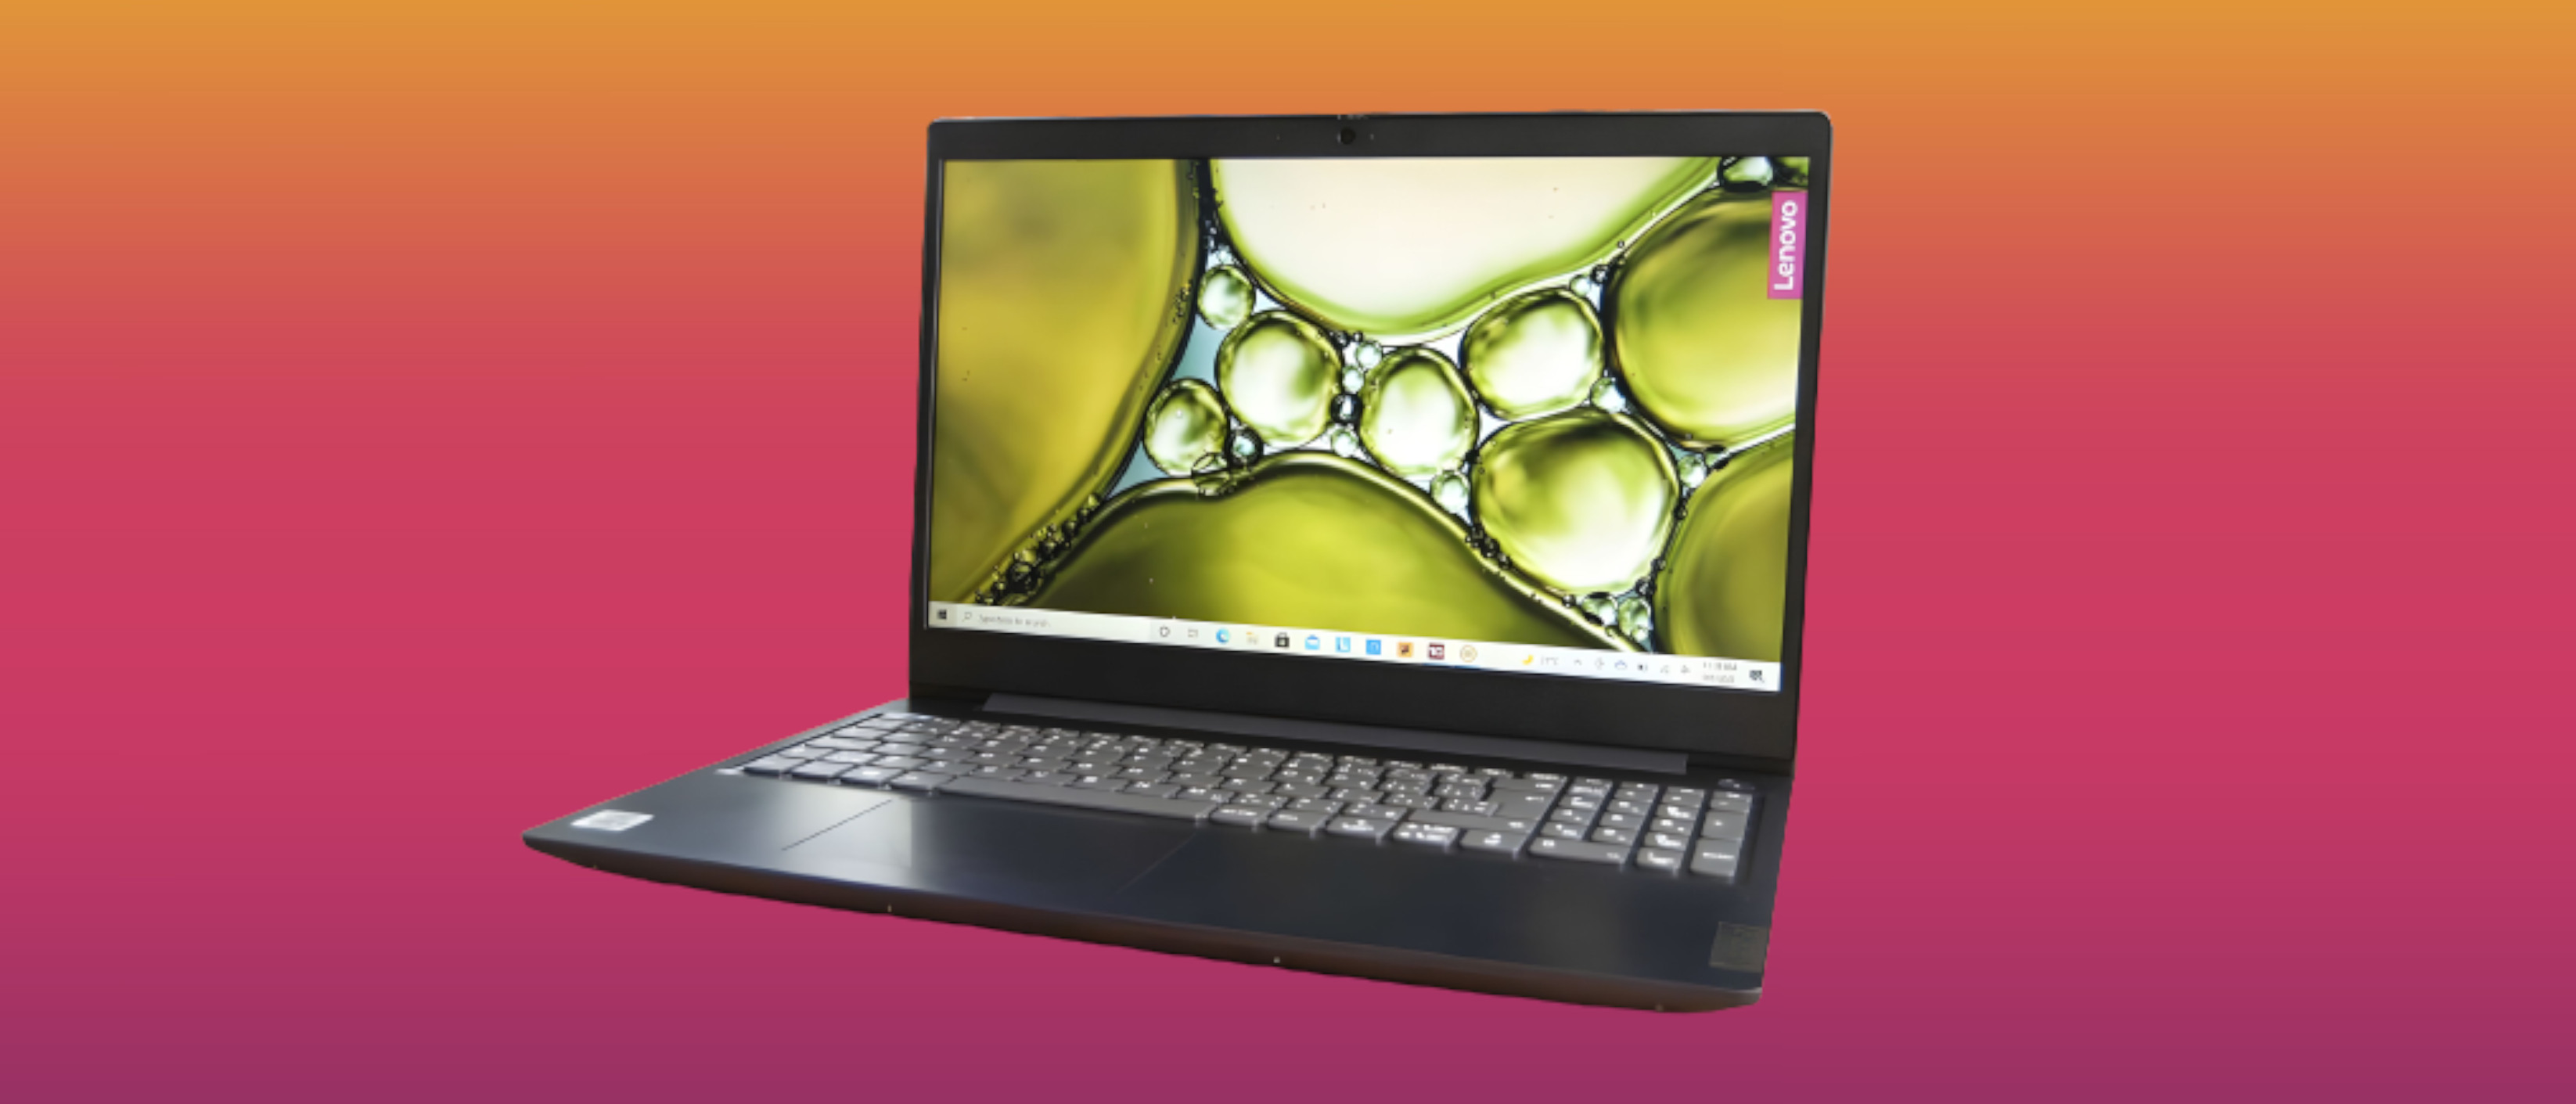 Lenovo IdeaPad 3 15 features $400 | Central review: better Windows enticing, is but elsewhere get you can